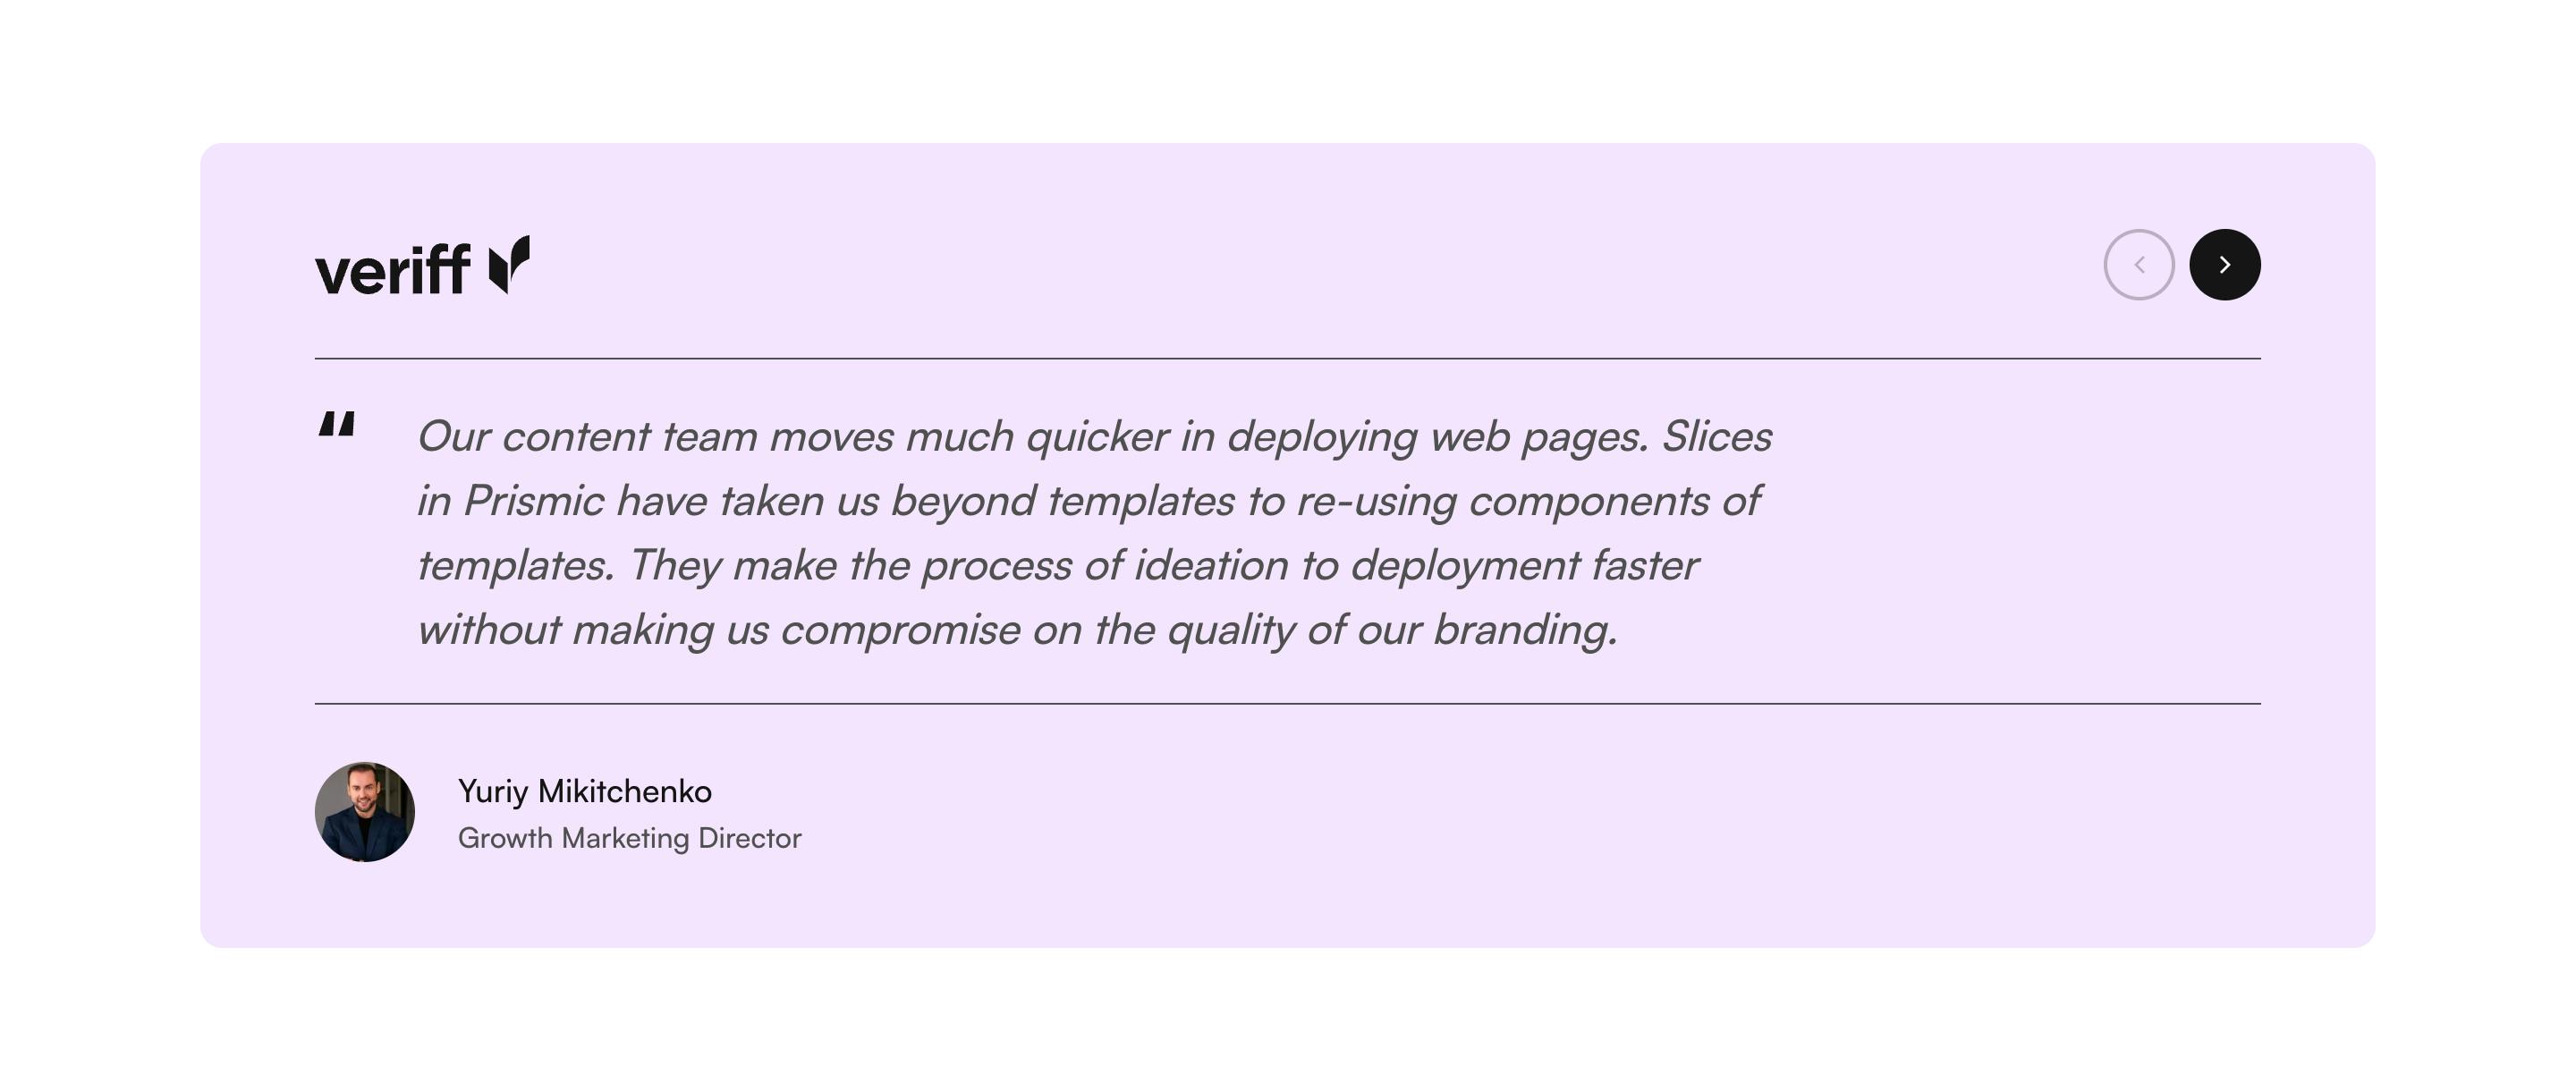 An image of testimonials default slice in the Prismic Page Builder.